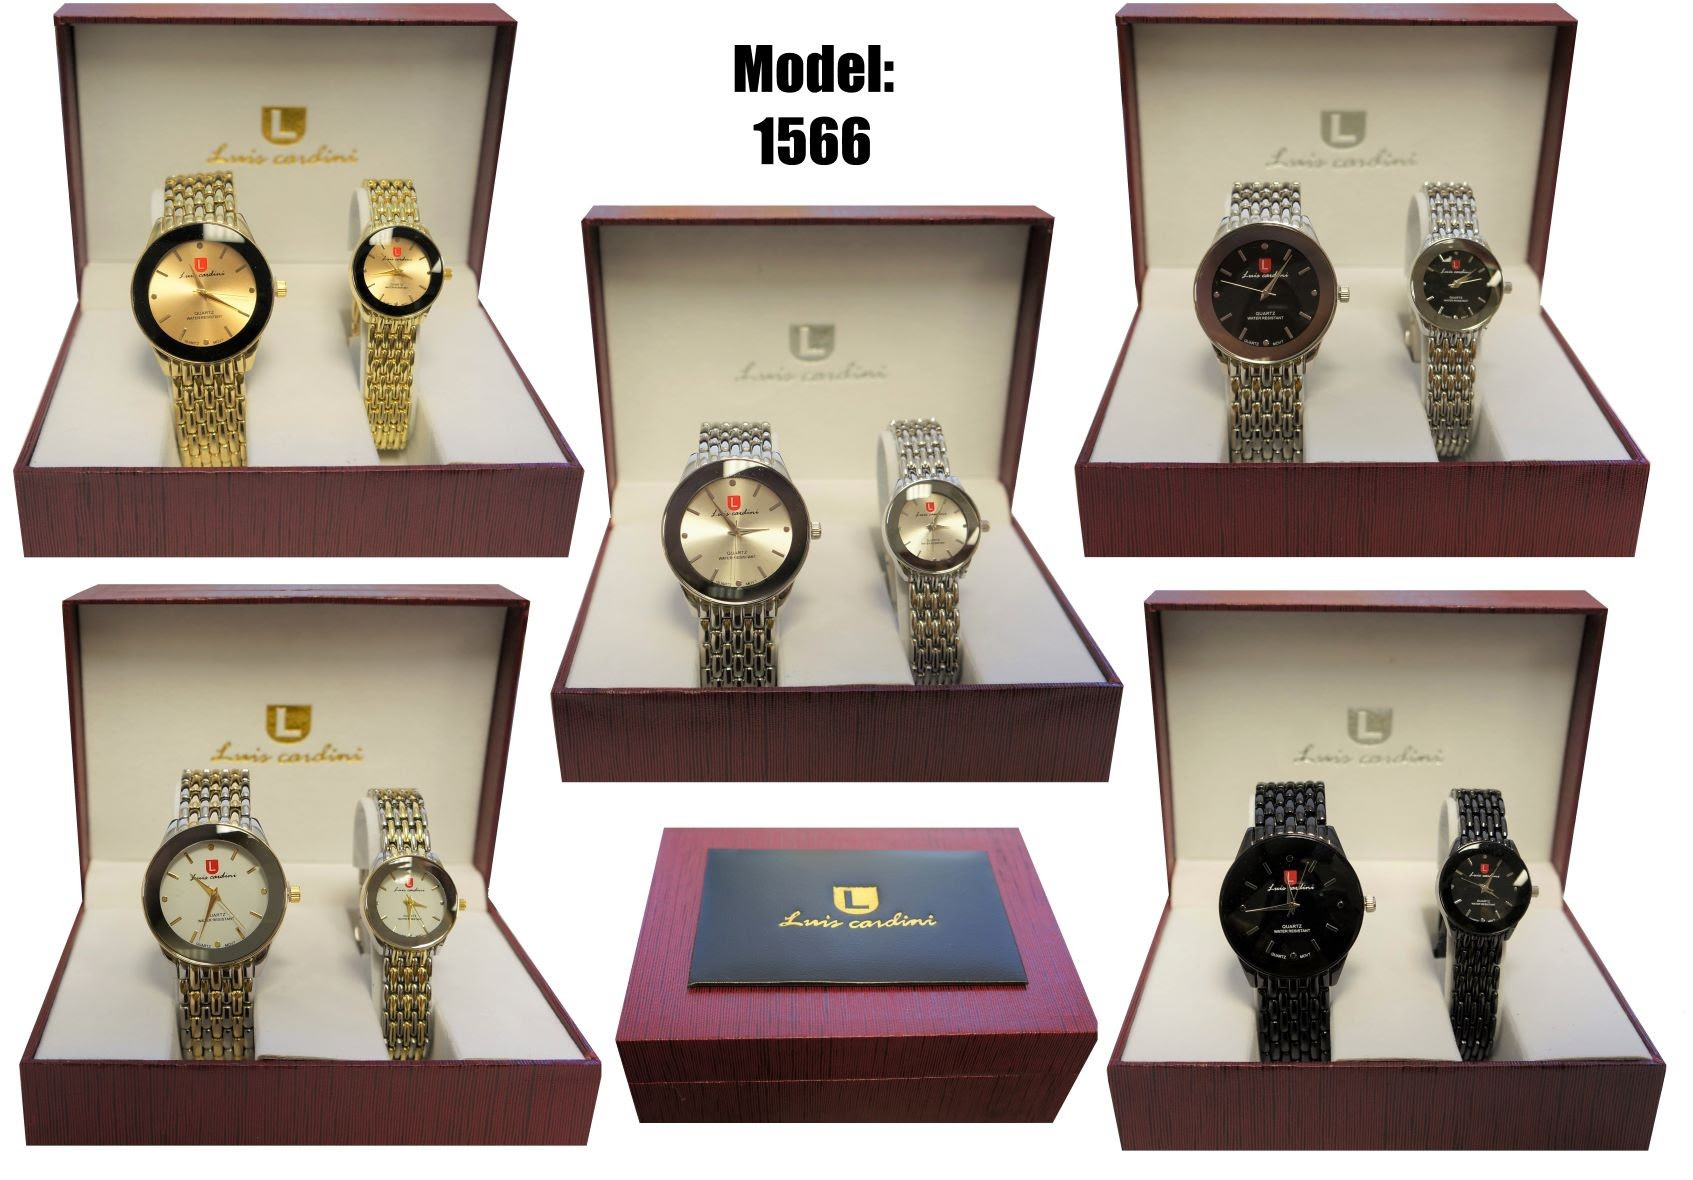 Luis Cardini Couples Watch Gift Sets. 6000sets. EXW Los Angeles $10.95/set.